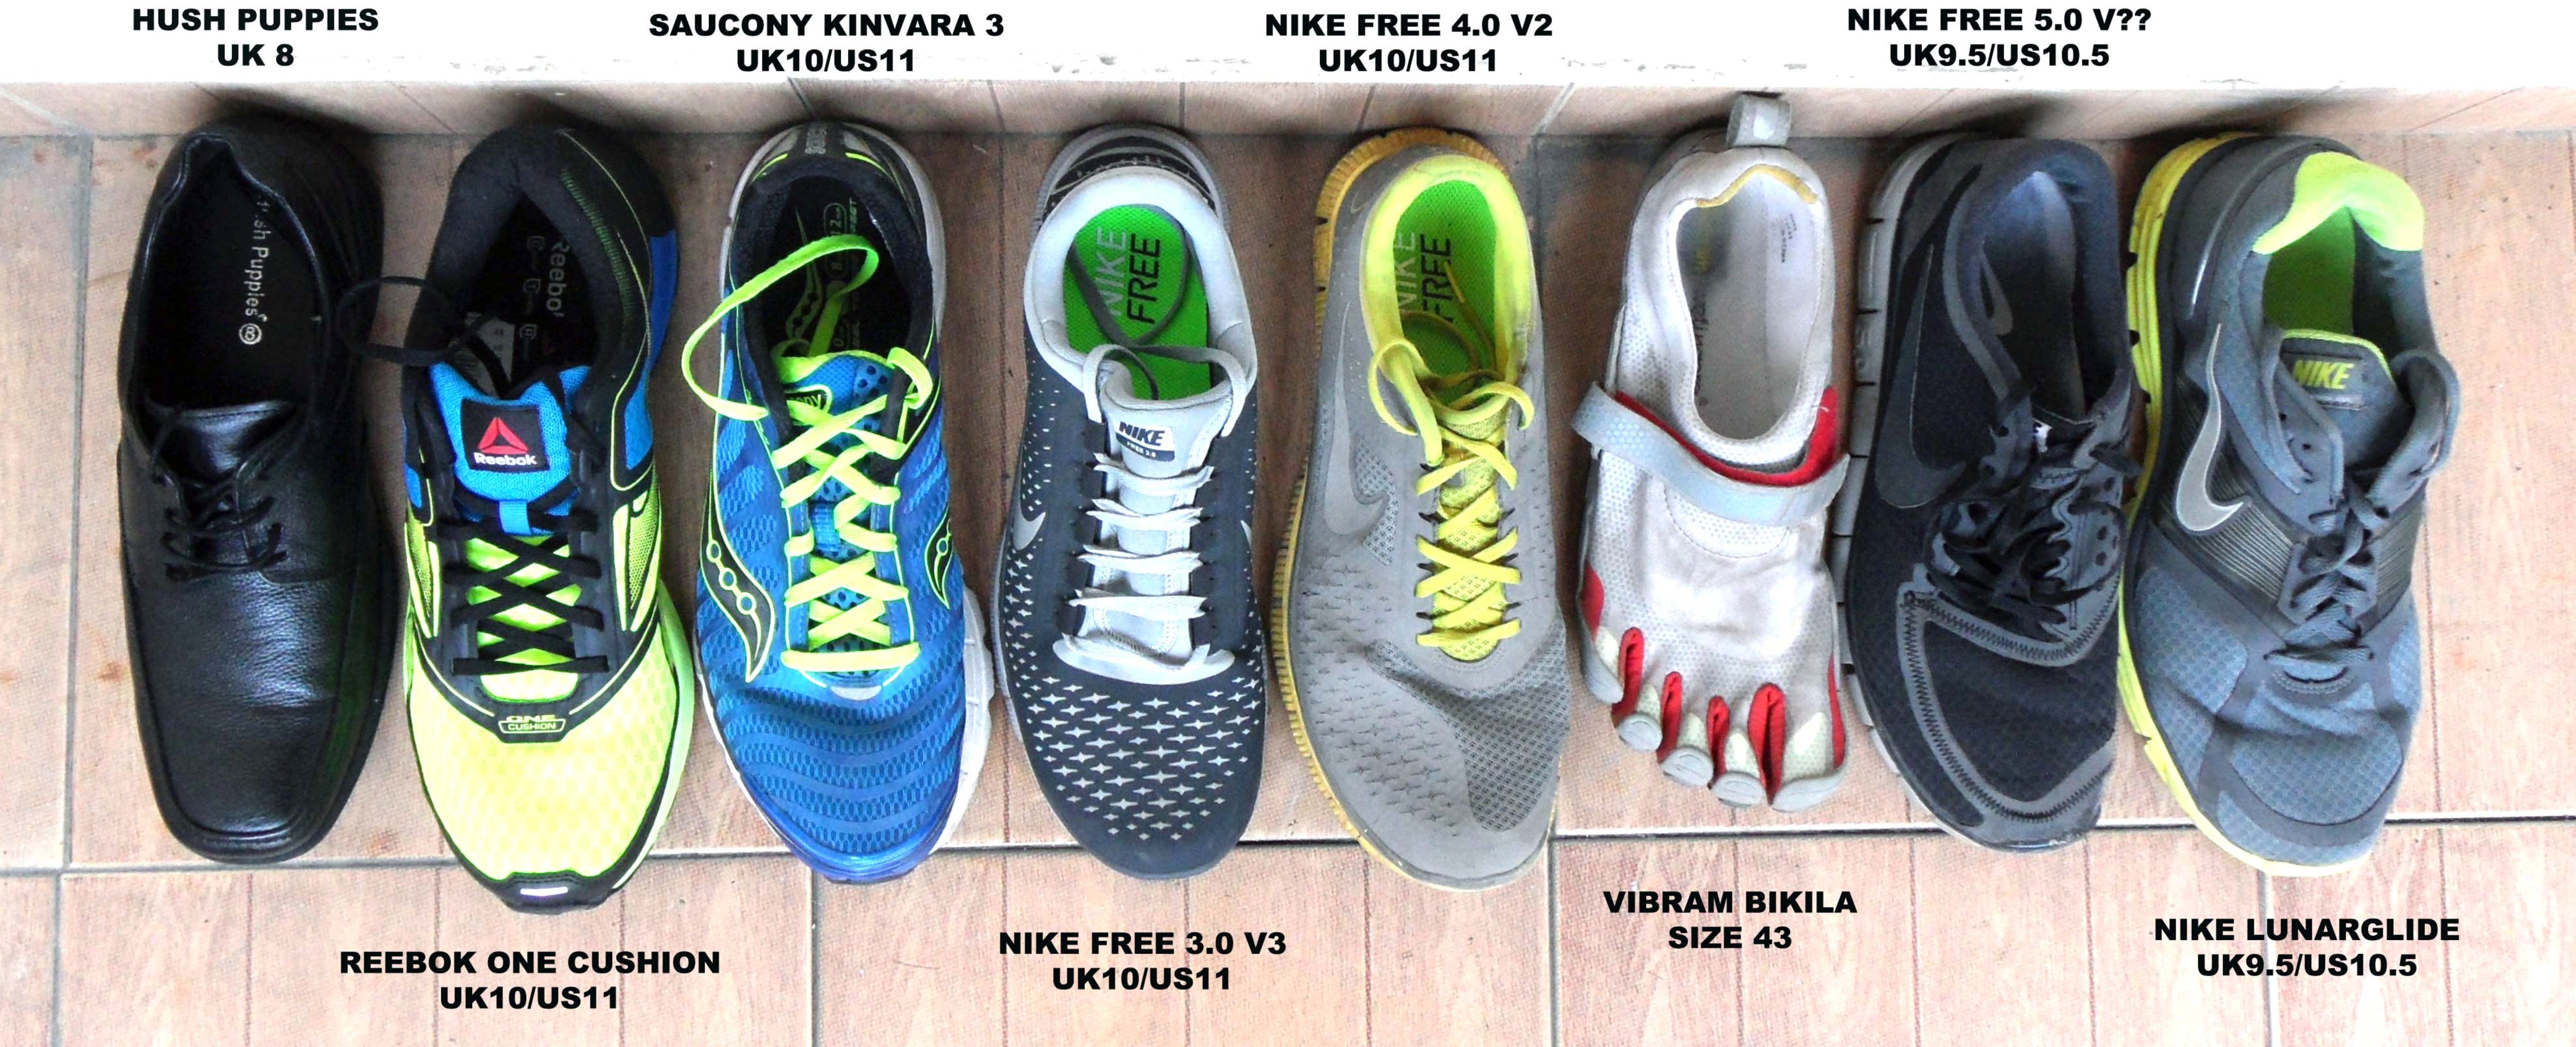 saucony compared to nike sizing